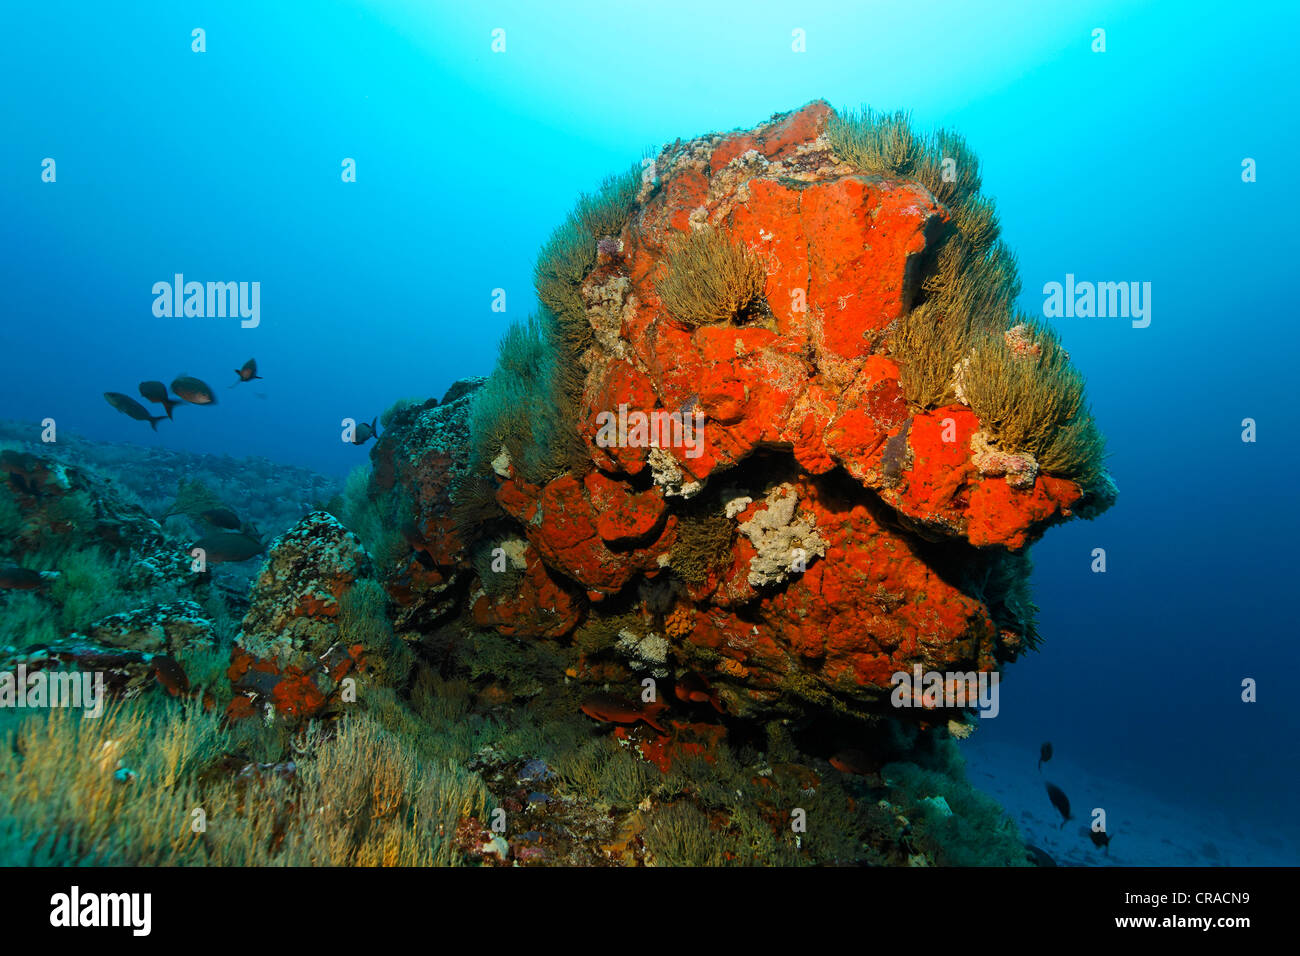 Rock covered with red sponges, yellow polyps, Black Coral (Antipathes galapagensis), drop-off, underwater scenery Stock Photo